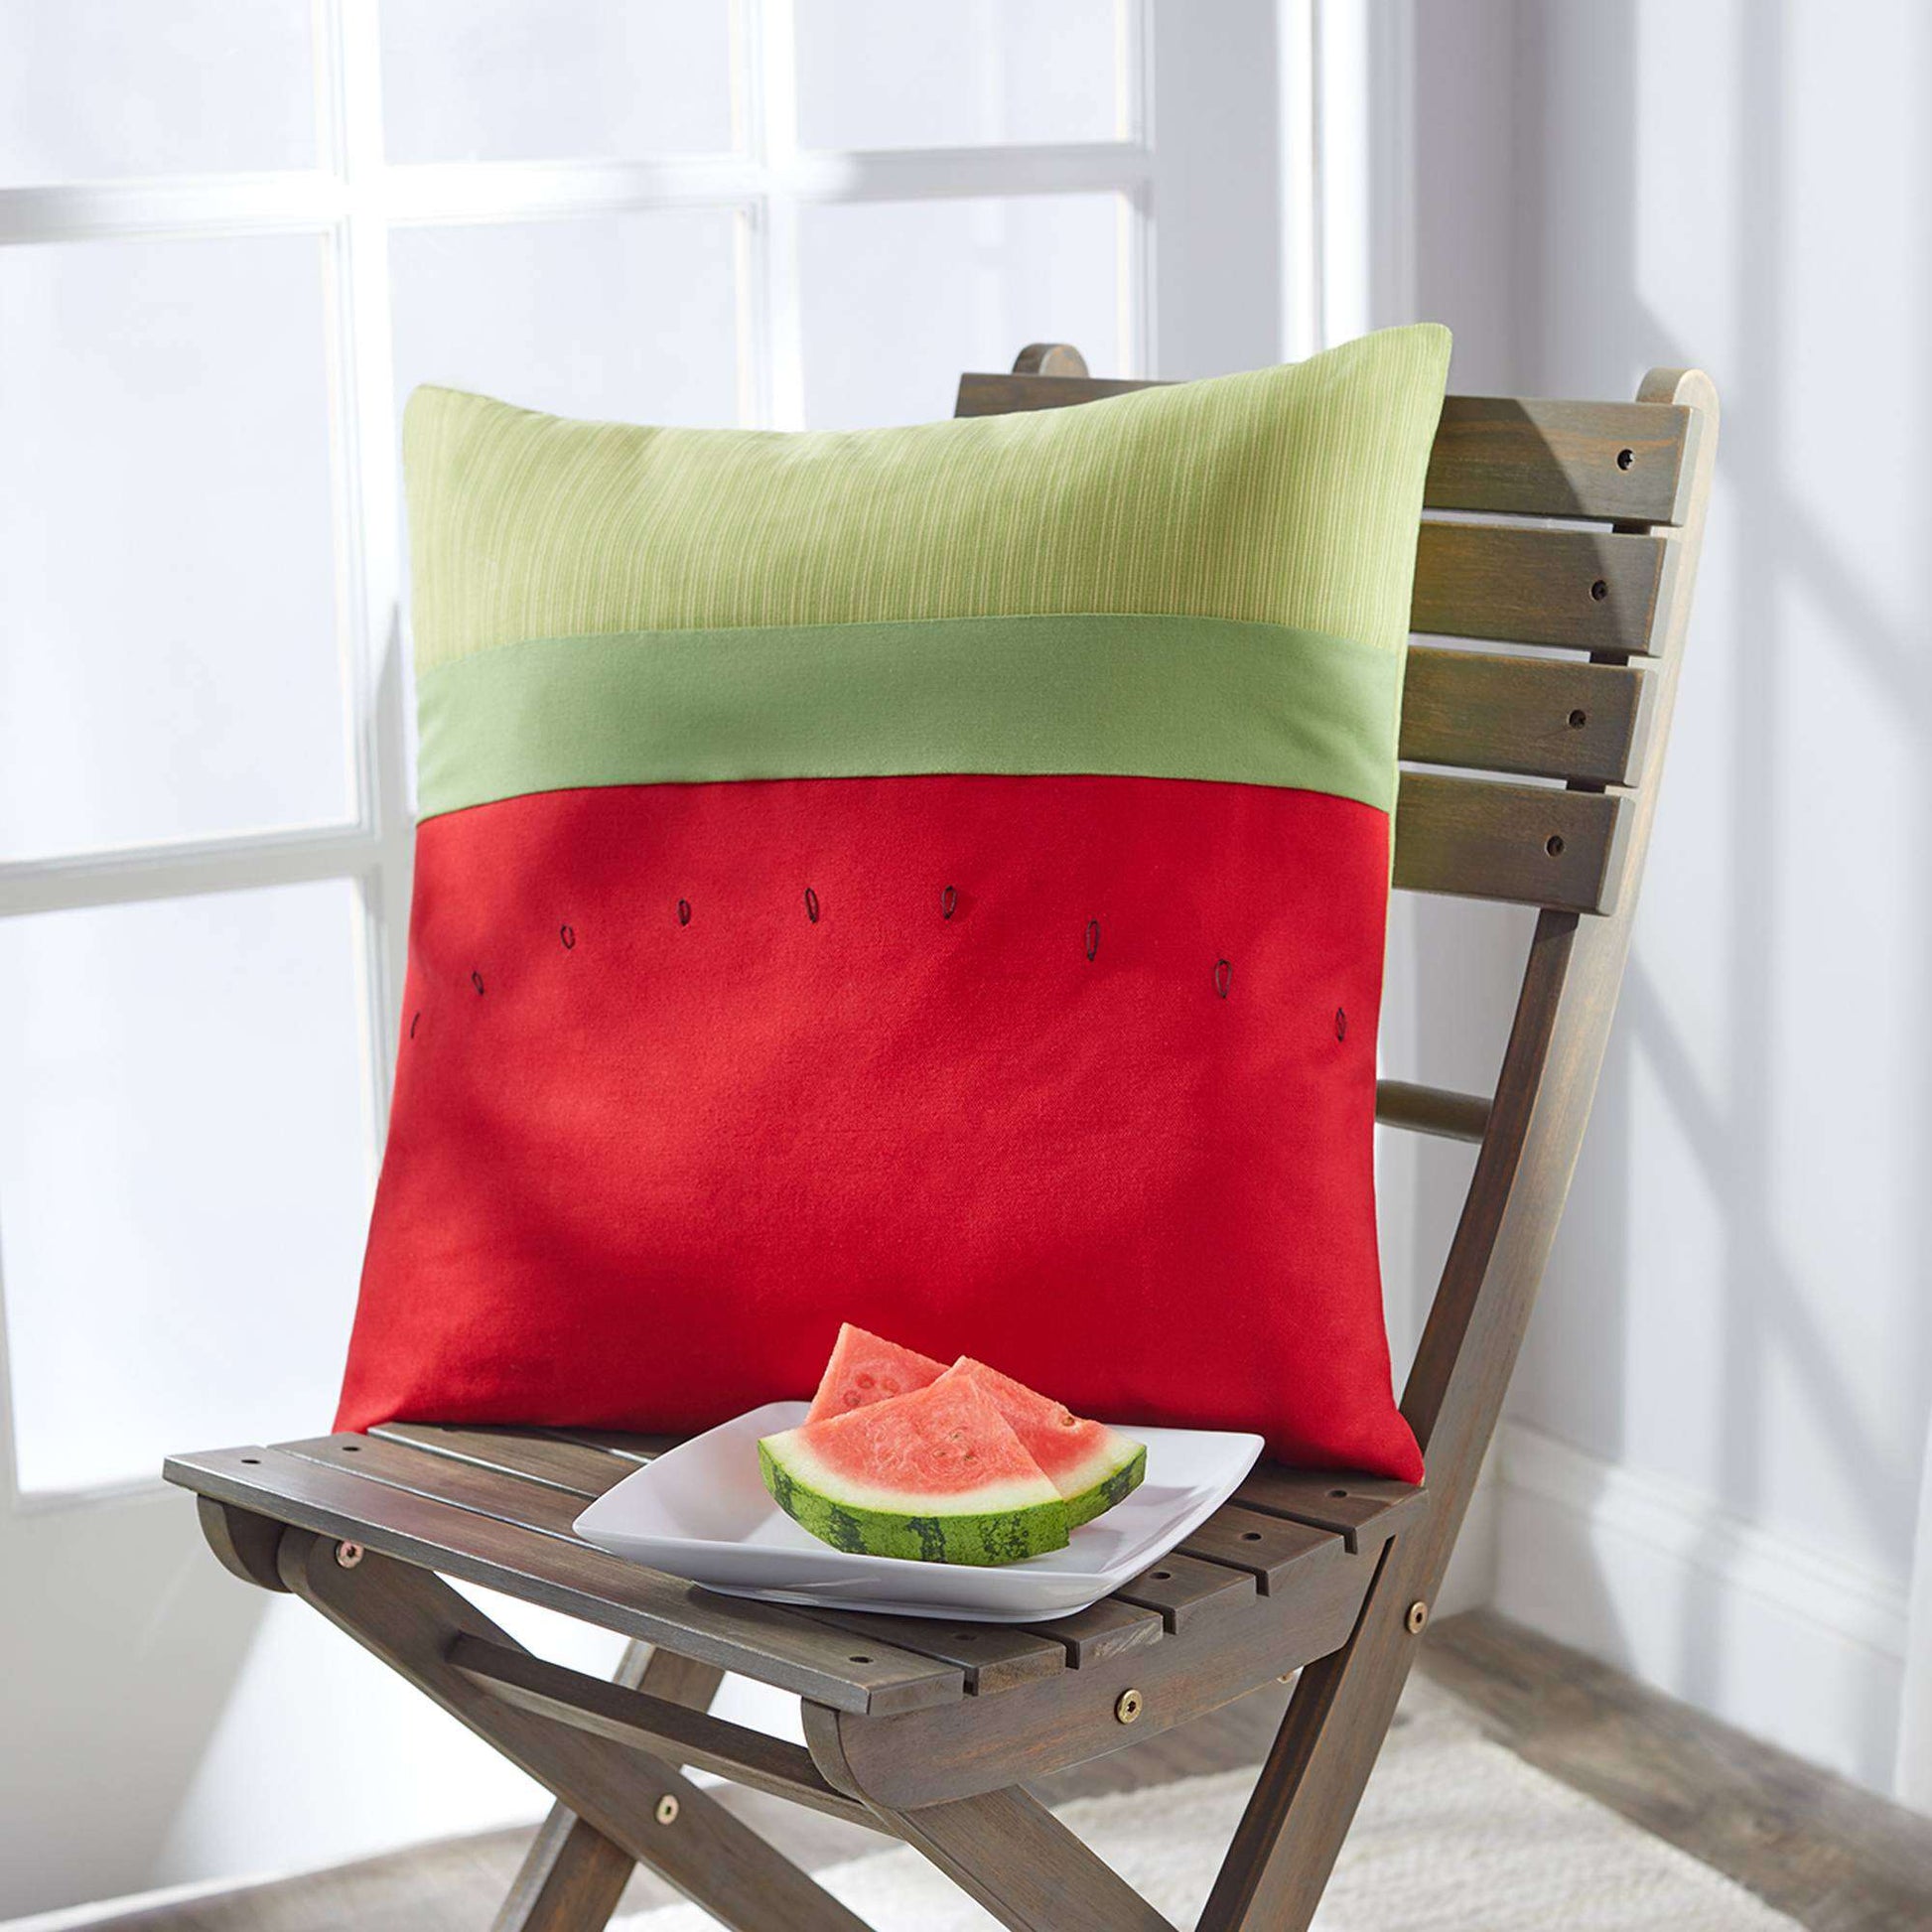 Free Coats & Clark Sewing Watermelon Patio Pillow For Outdoor Decor Pattern